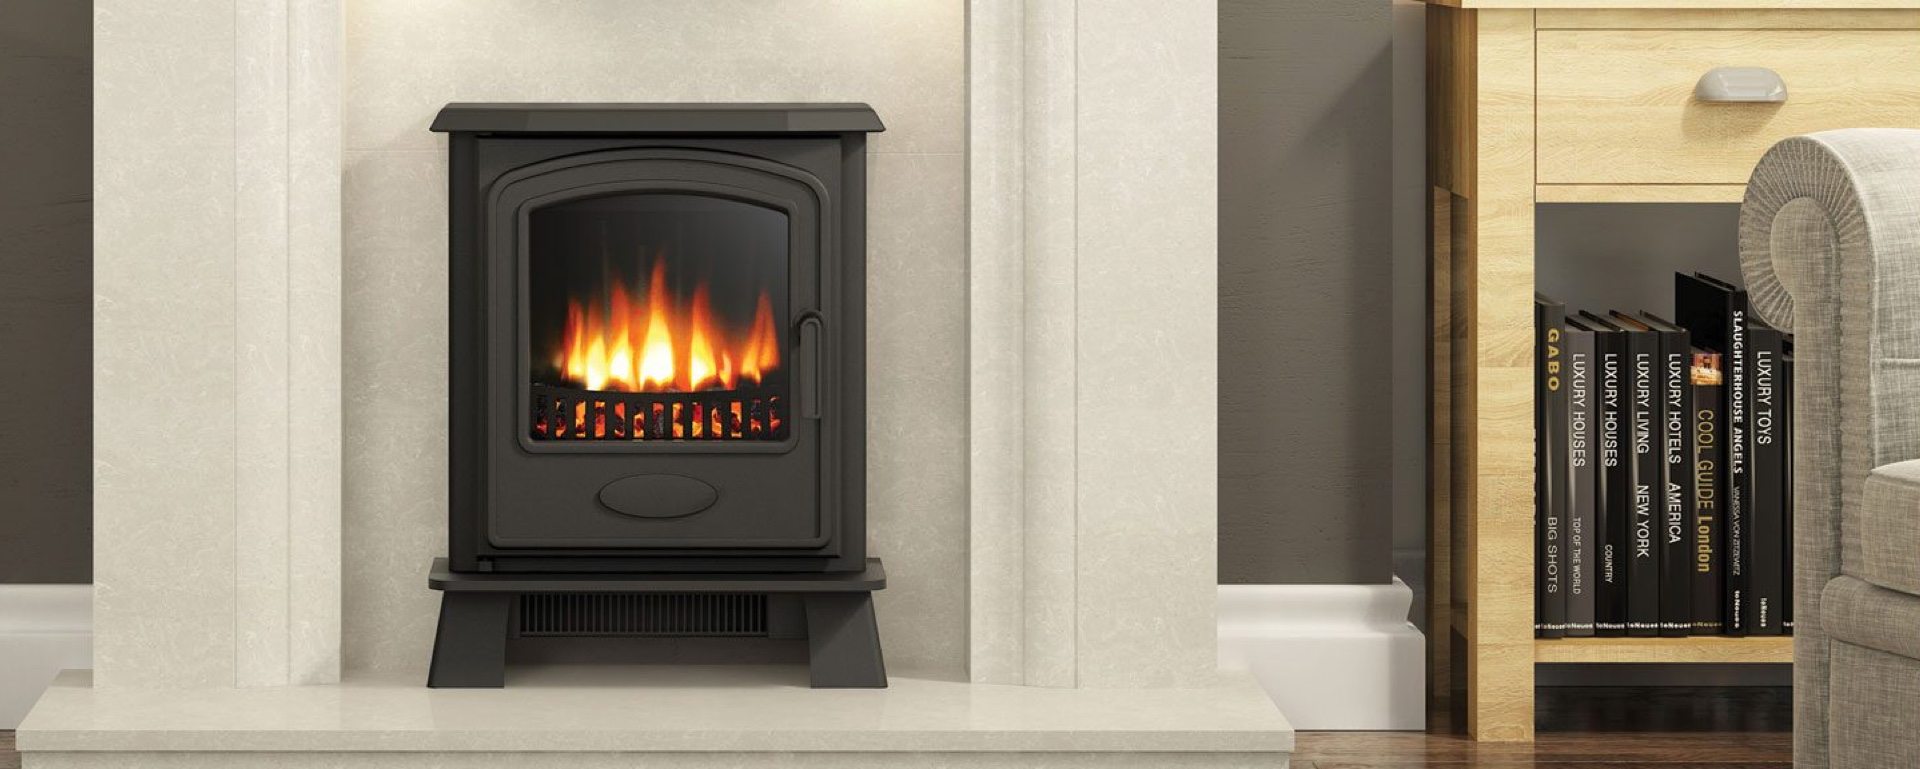 Elgin & Hall Hereford Canterbury Fireplaces